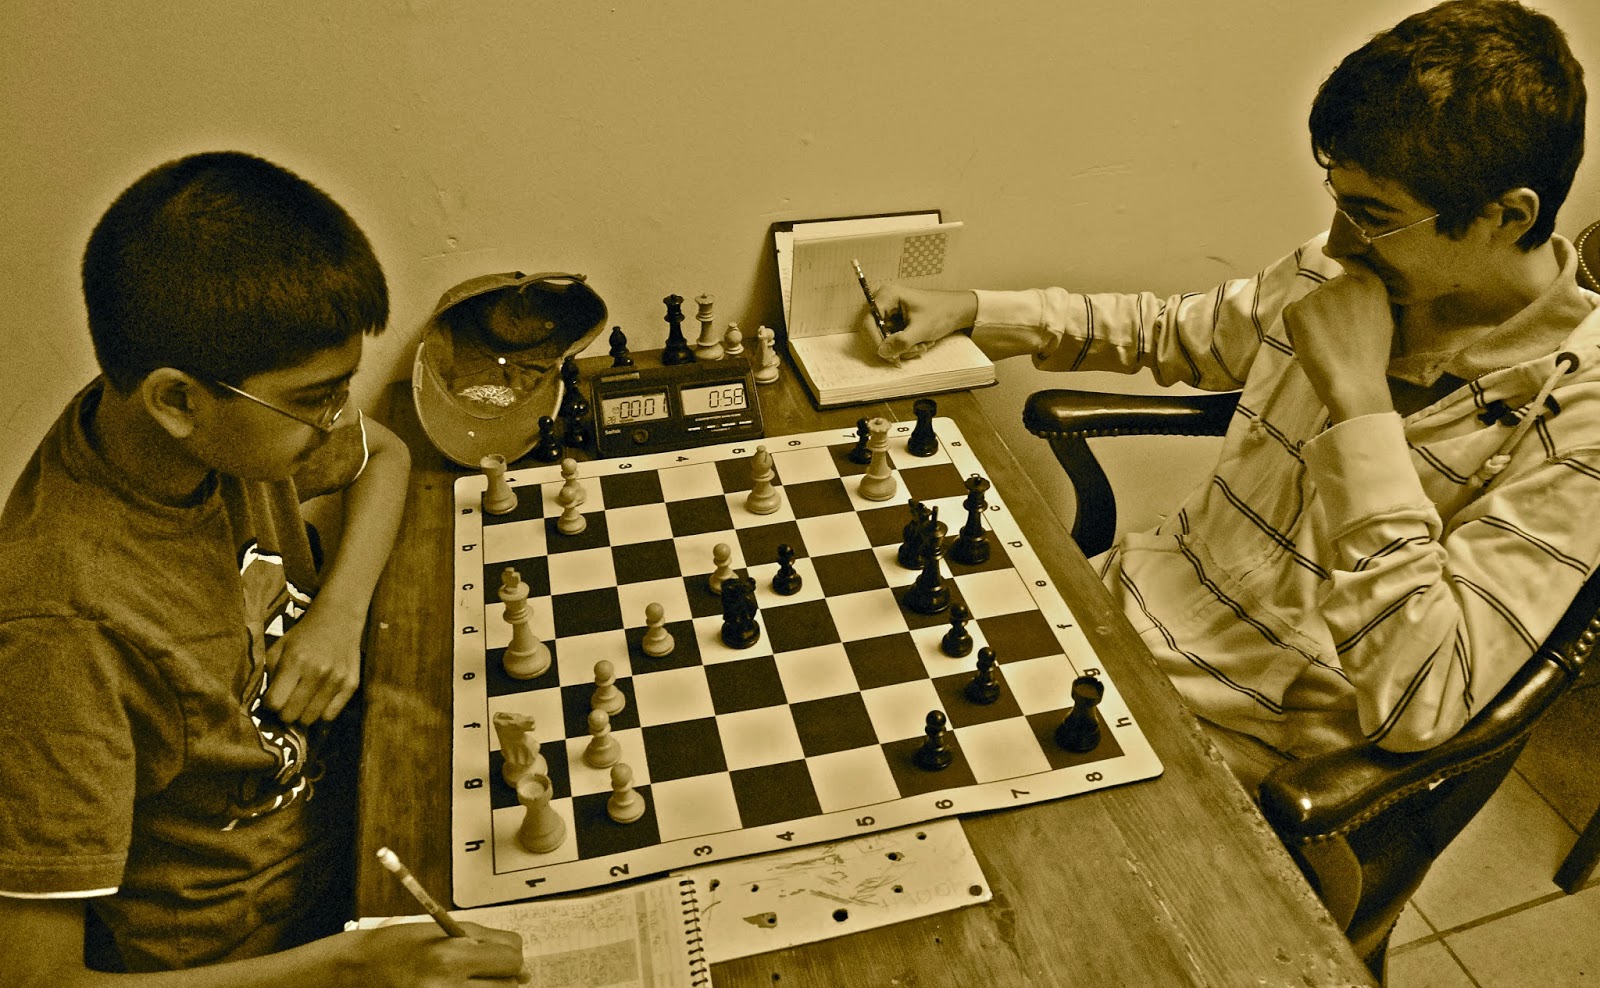 Pueblo Chess Club meets regularly at The Daily Grind